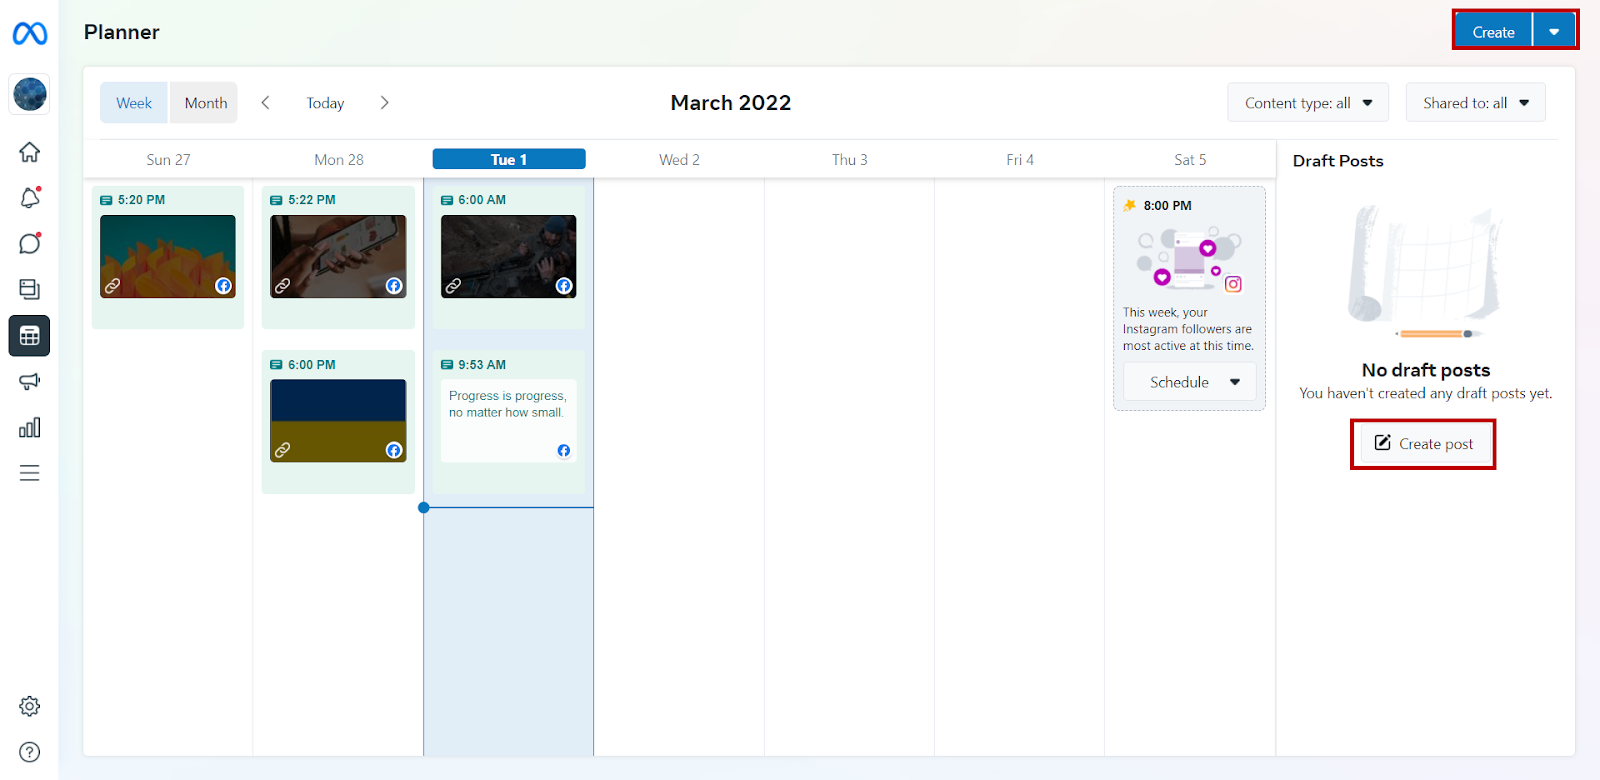 You can schedule your Facebook posts on the calendar.